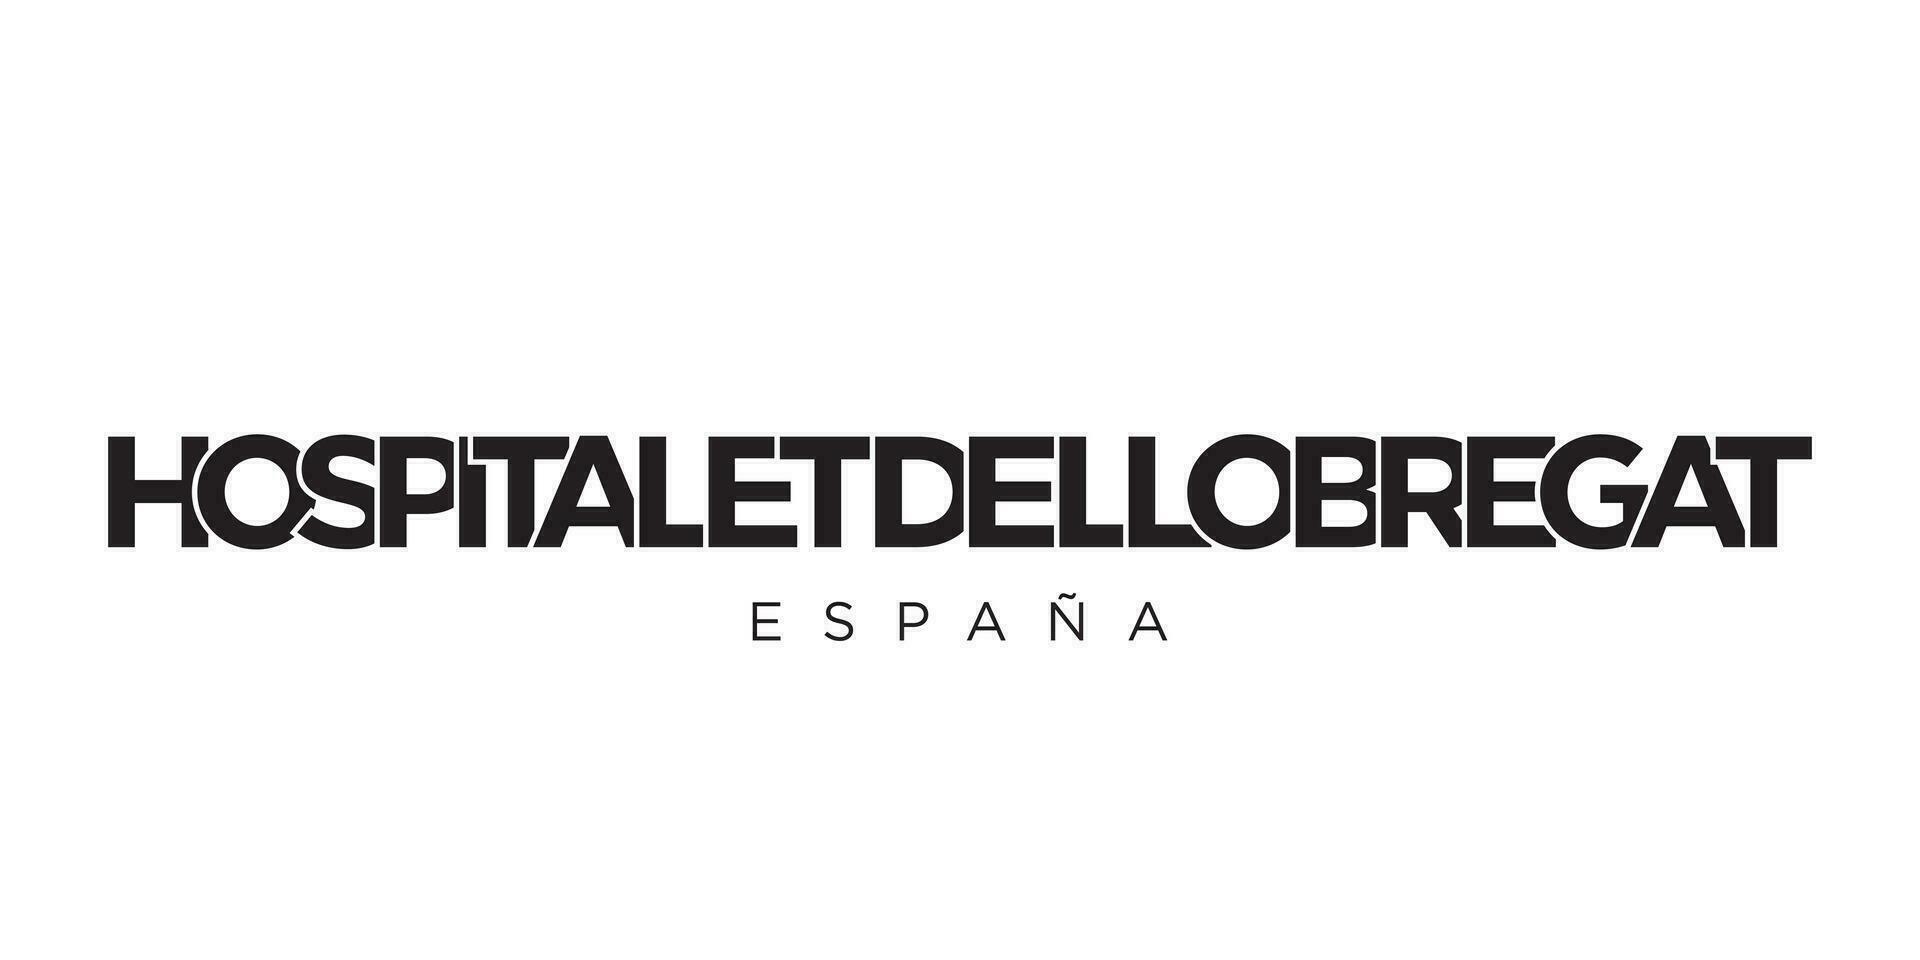 Hospitalet de Llobregat in the Spain emblem. The design features a geometric style, vector illustration with bold typography in a modern font. The graphic slogan lettering.